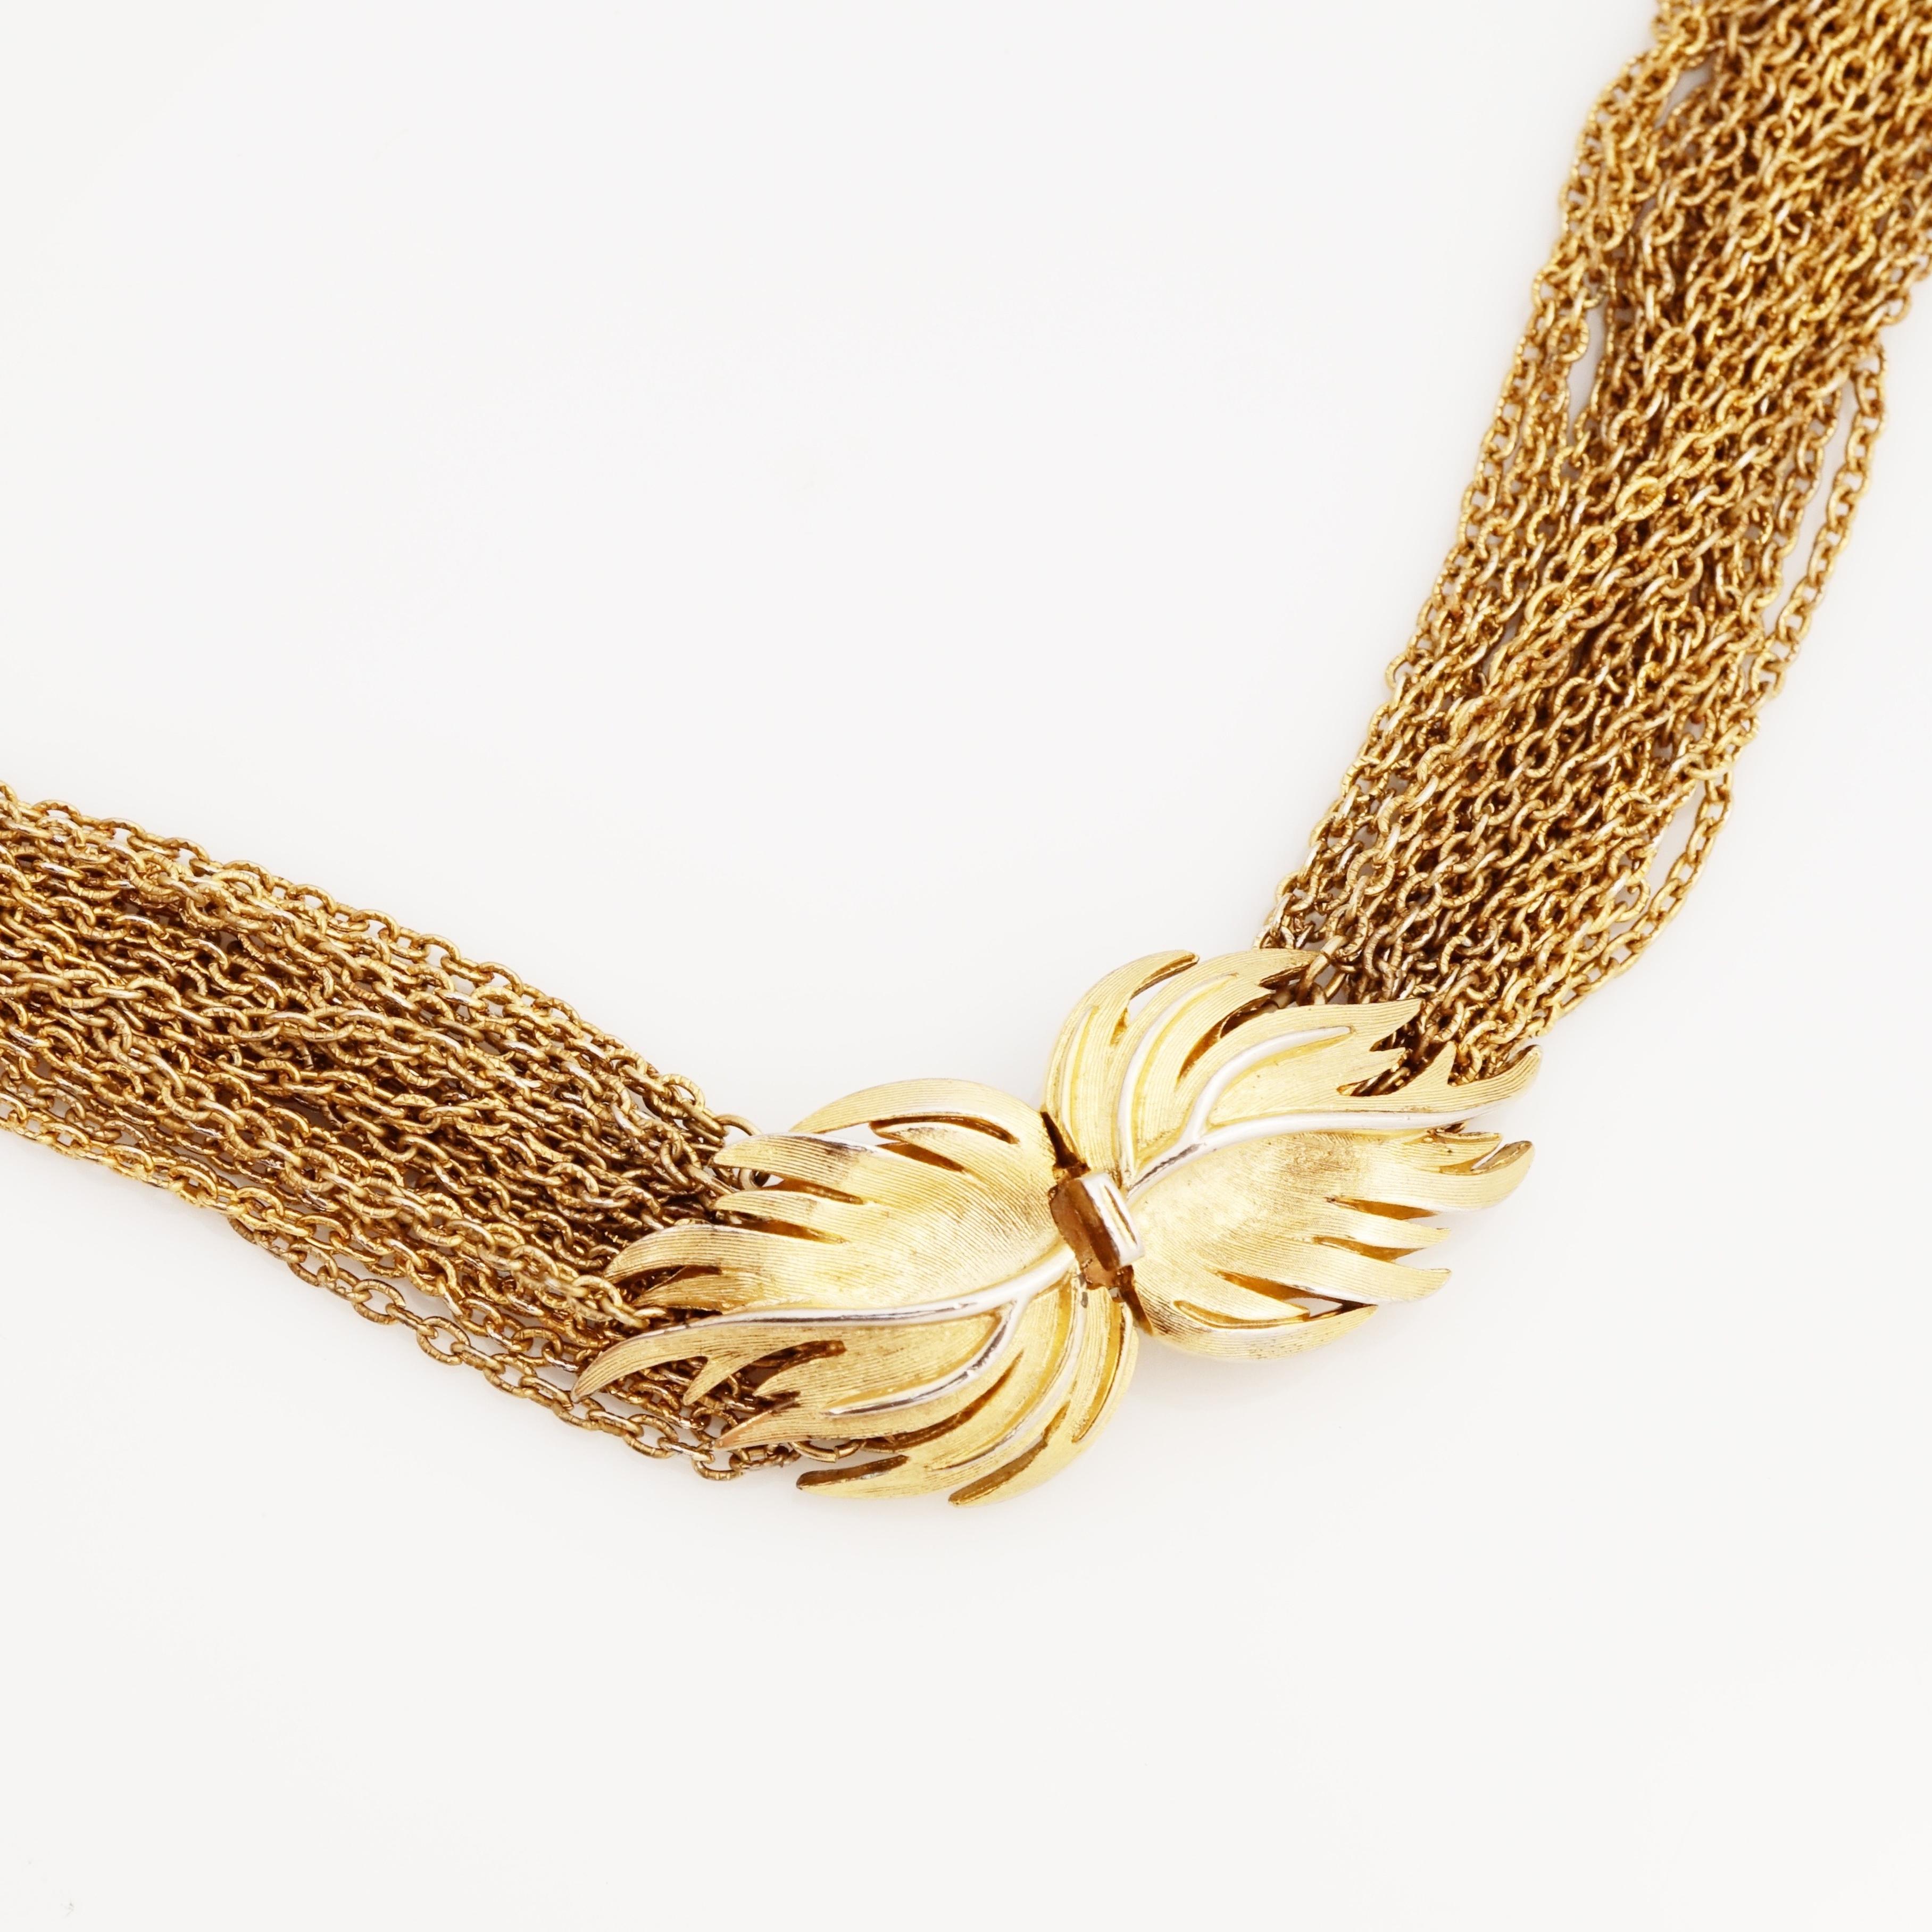 Modern Gilded Multi Chain Necklace With Leaf Clasp By Crown Trifari, 1950s For Sale